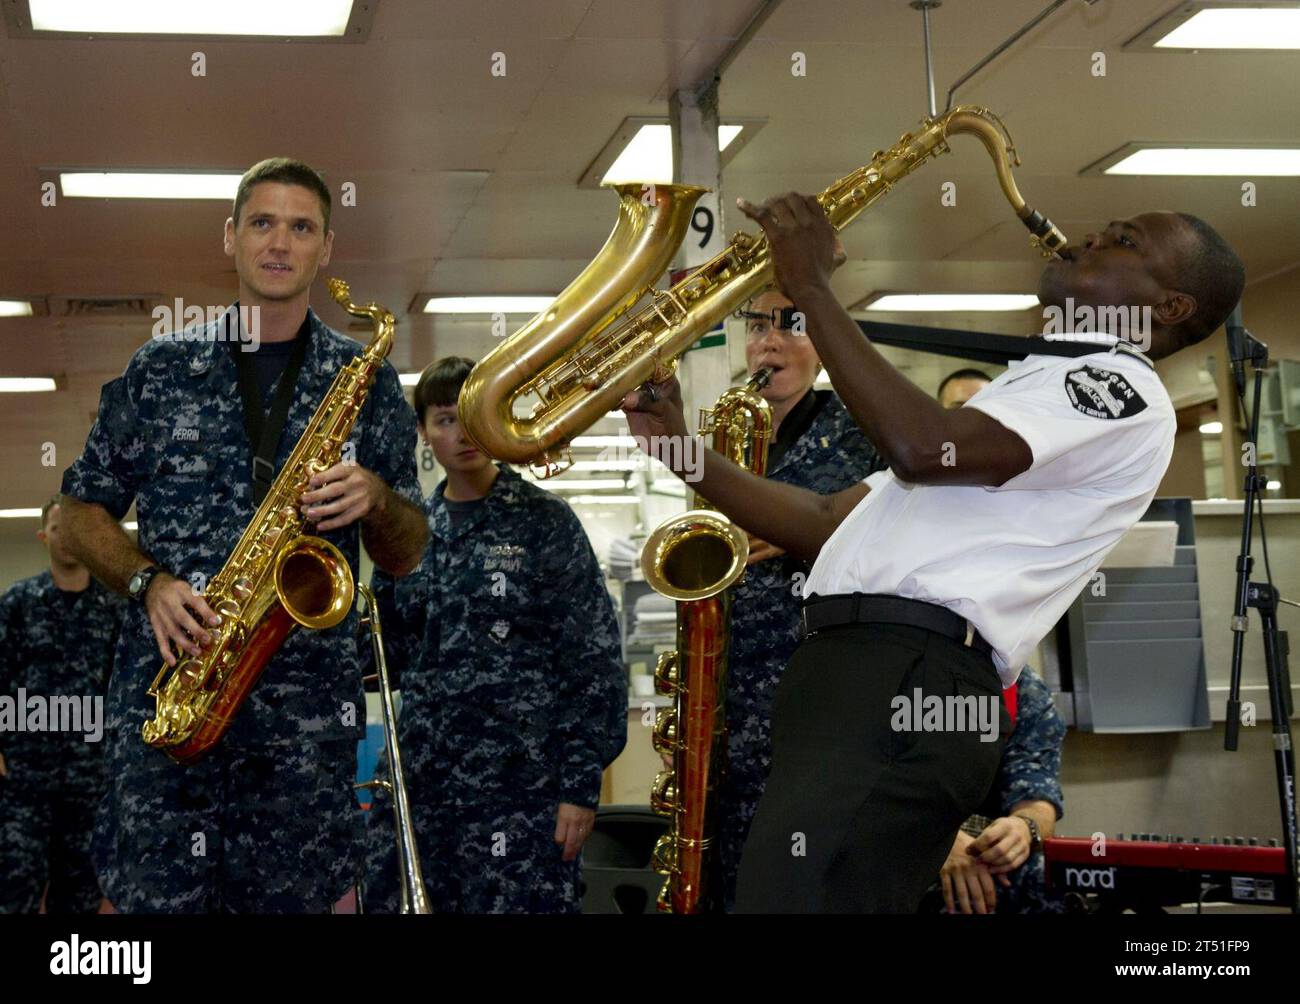 110829RM525-138 PORT-AU-PRINCE, Haiti (Aug. 29, 2011) A Haitian Police Band member plays the saxophone with U.S. Fleet Forces Band aboard the Military Sealift Command hospital ship USNS Comfort (T-AH 20) during Continuing Promise 2011. Continuing Promise is a five-month humanitarian assistance mission to the Caribbean, Central and South America. Navy Stock Photo